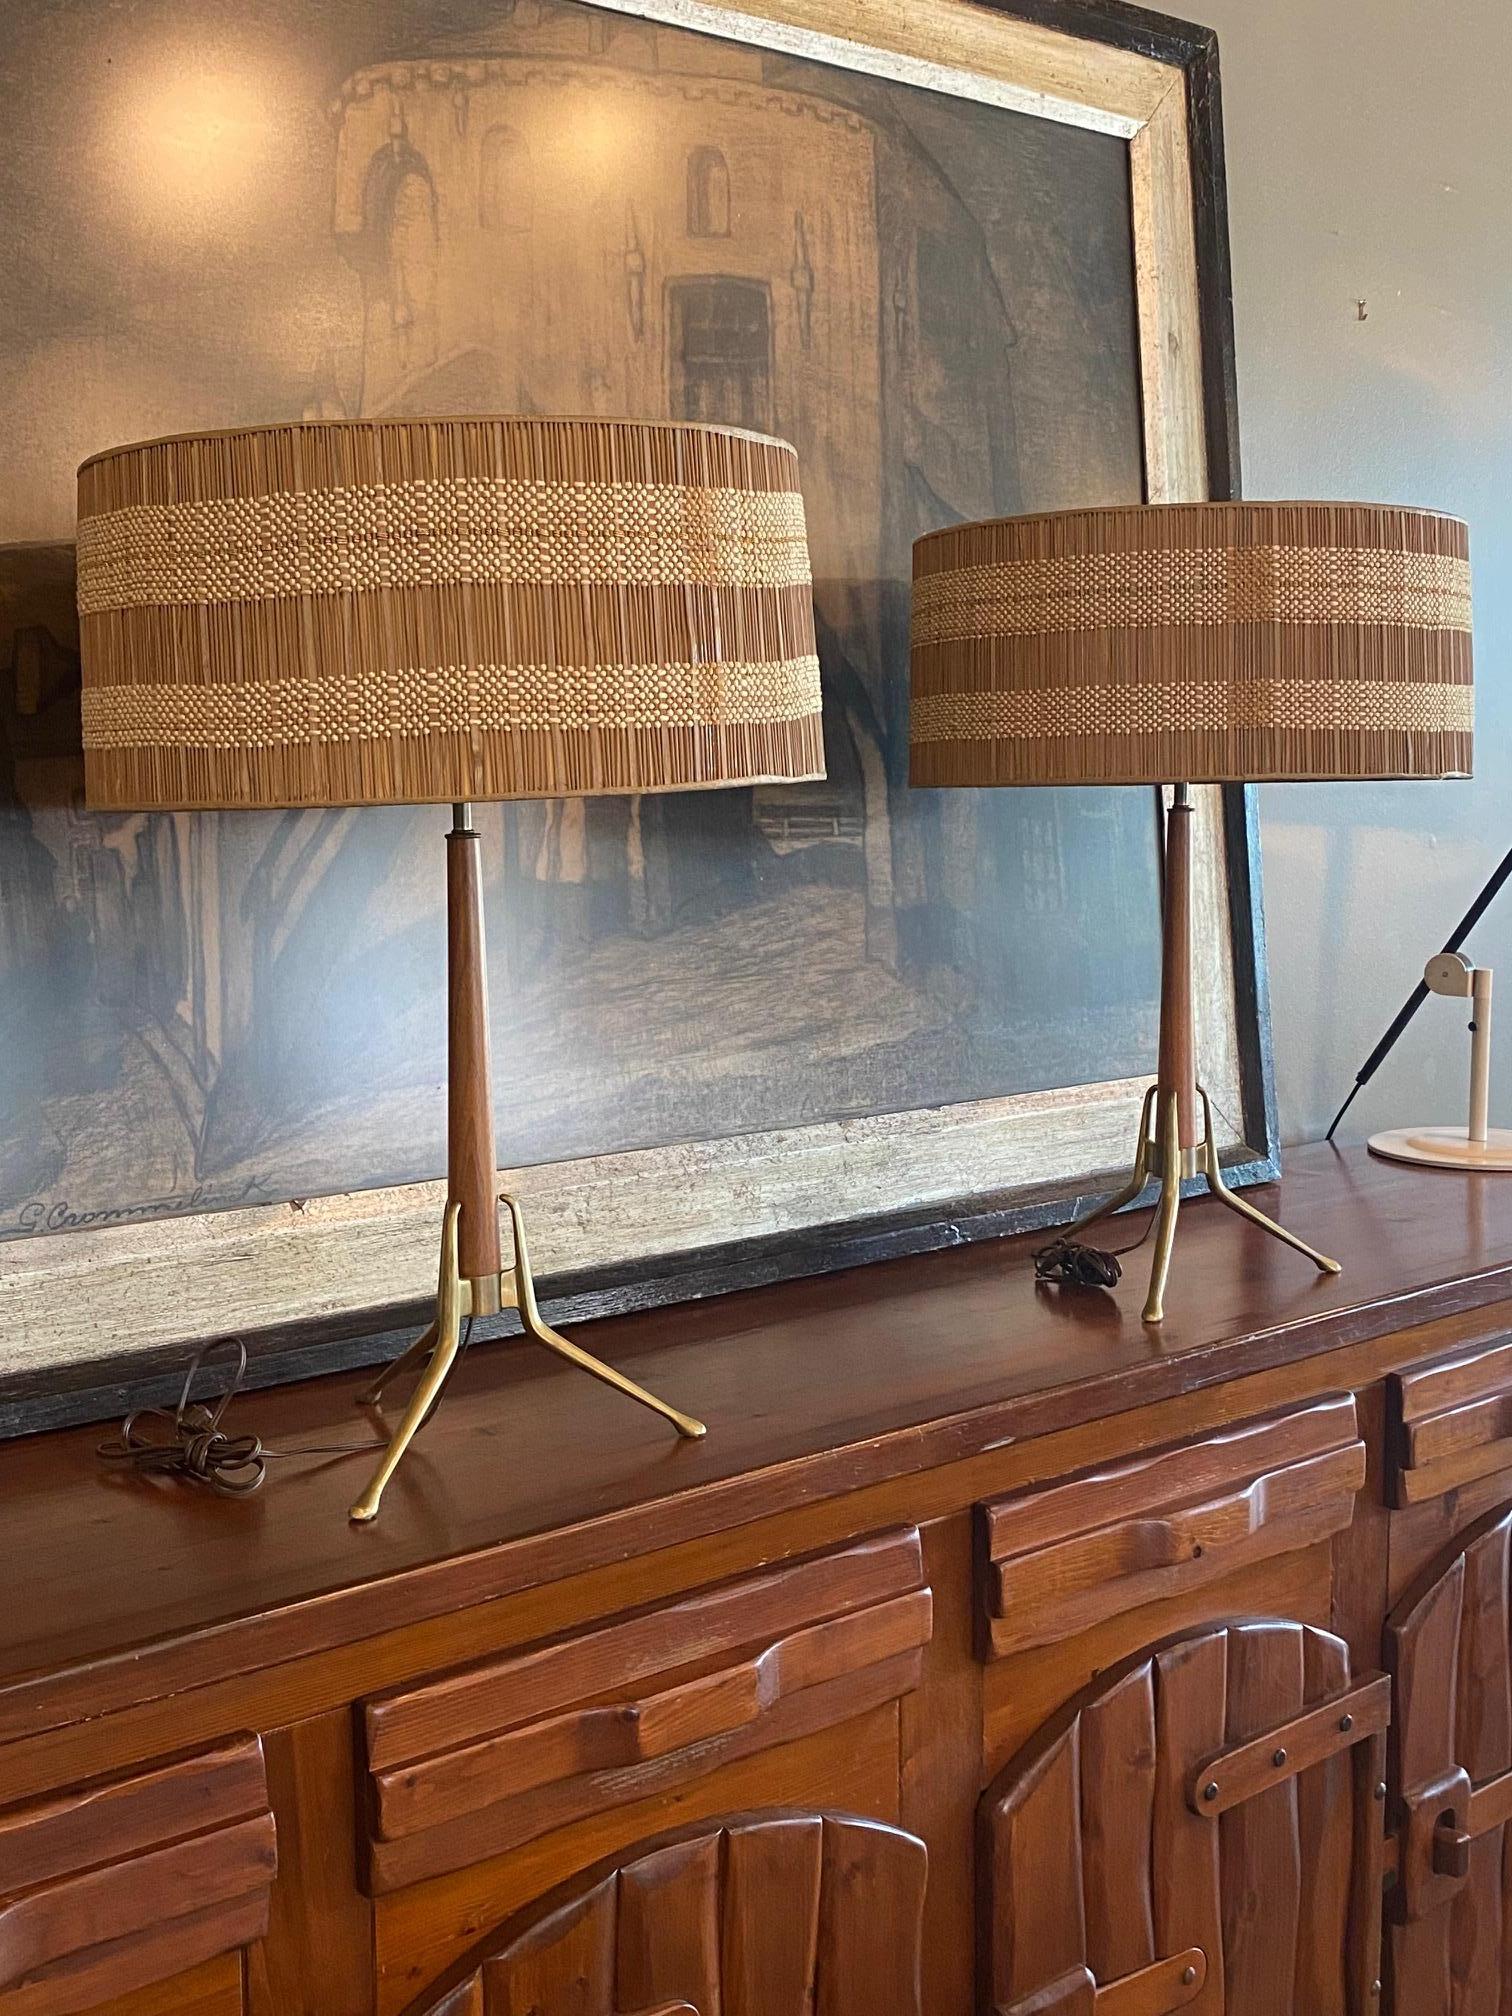 Gerald Thurston For Lightolier tripod mid century modern table lamps. Original matched pair of brass and walnut lamps retain perforated metal disc diffusors and outfitted with original Maria Kipp period lamp shades. Three bulb socket fixture allows